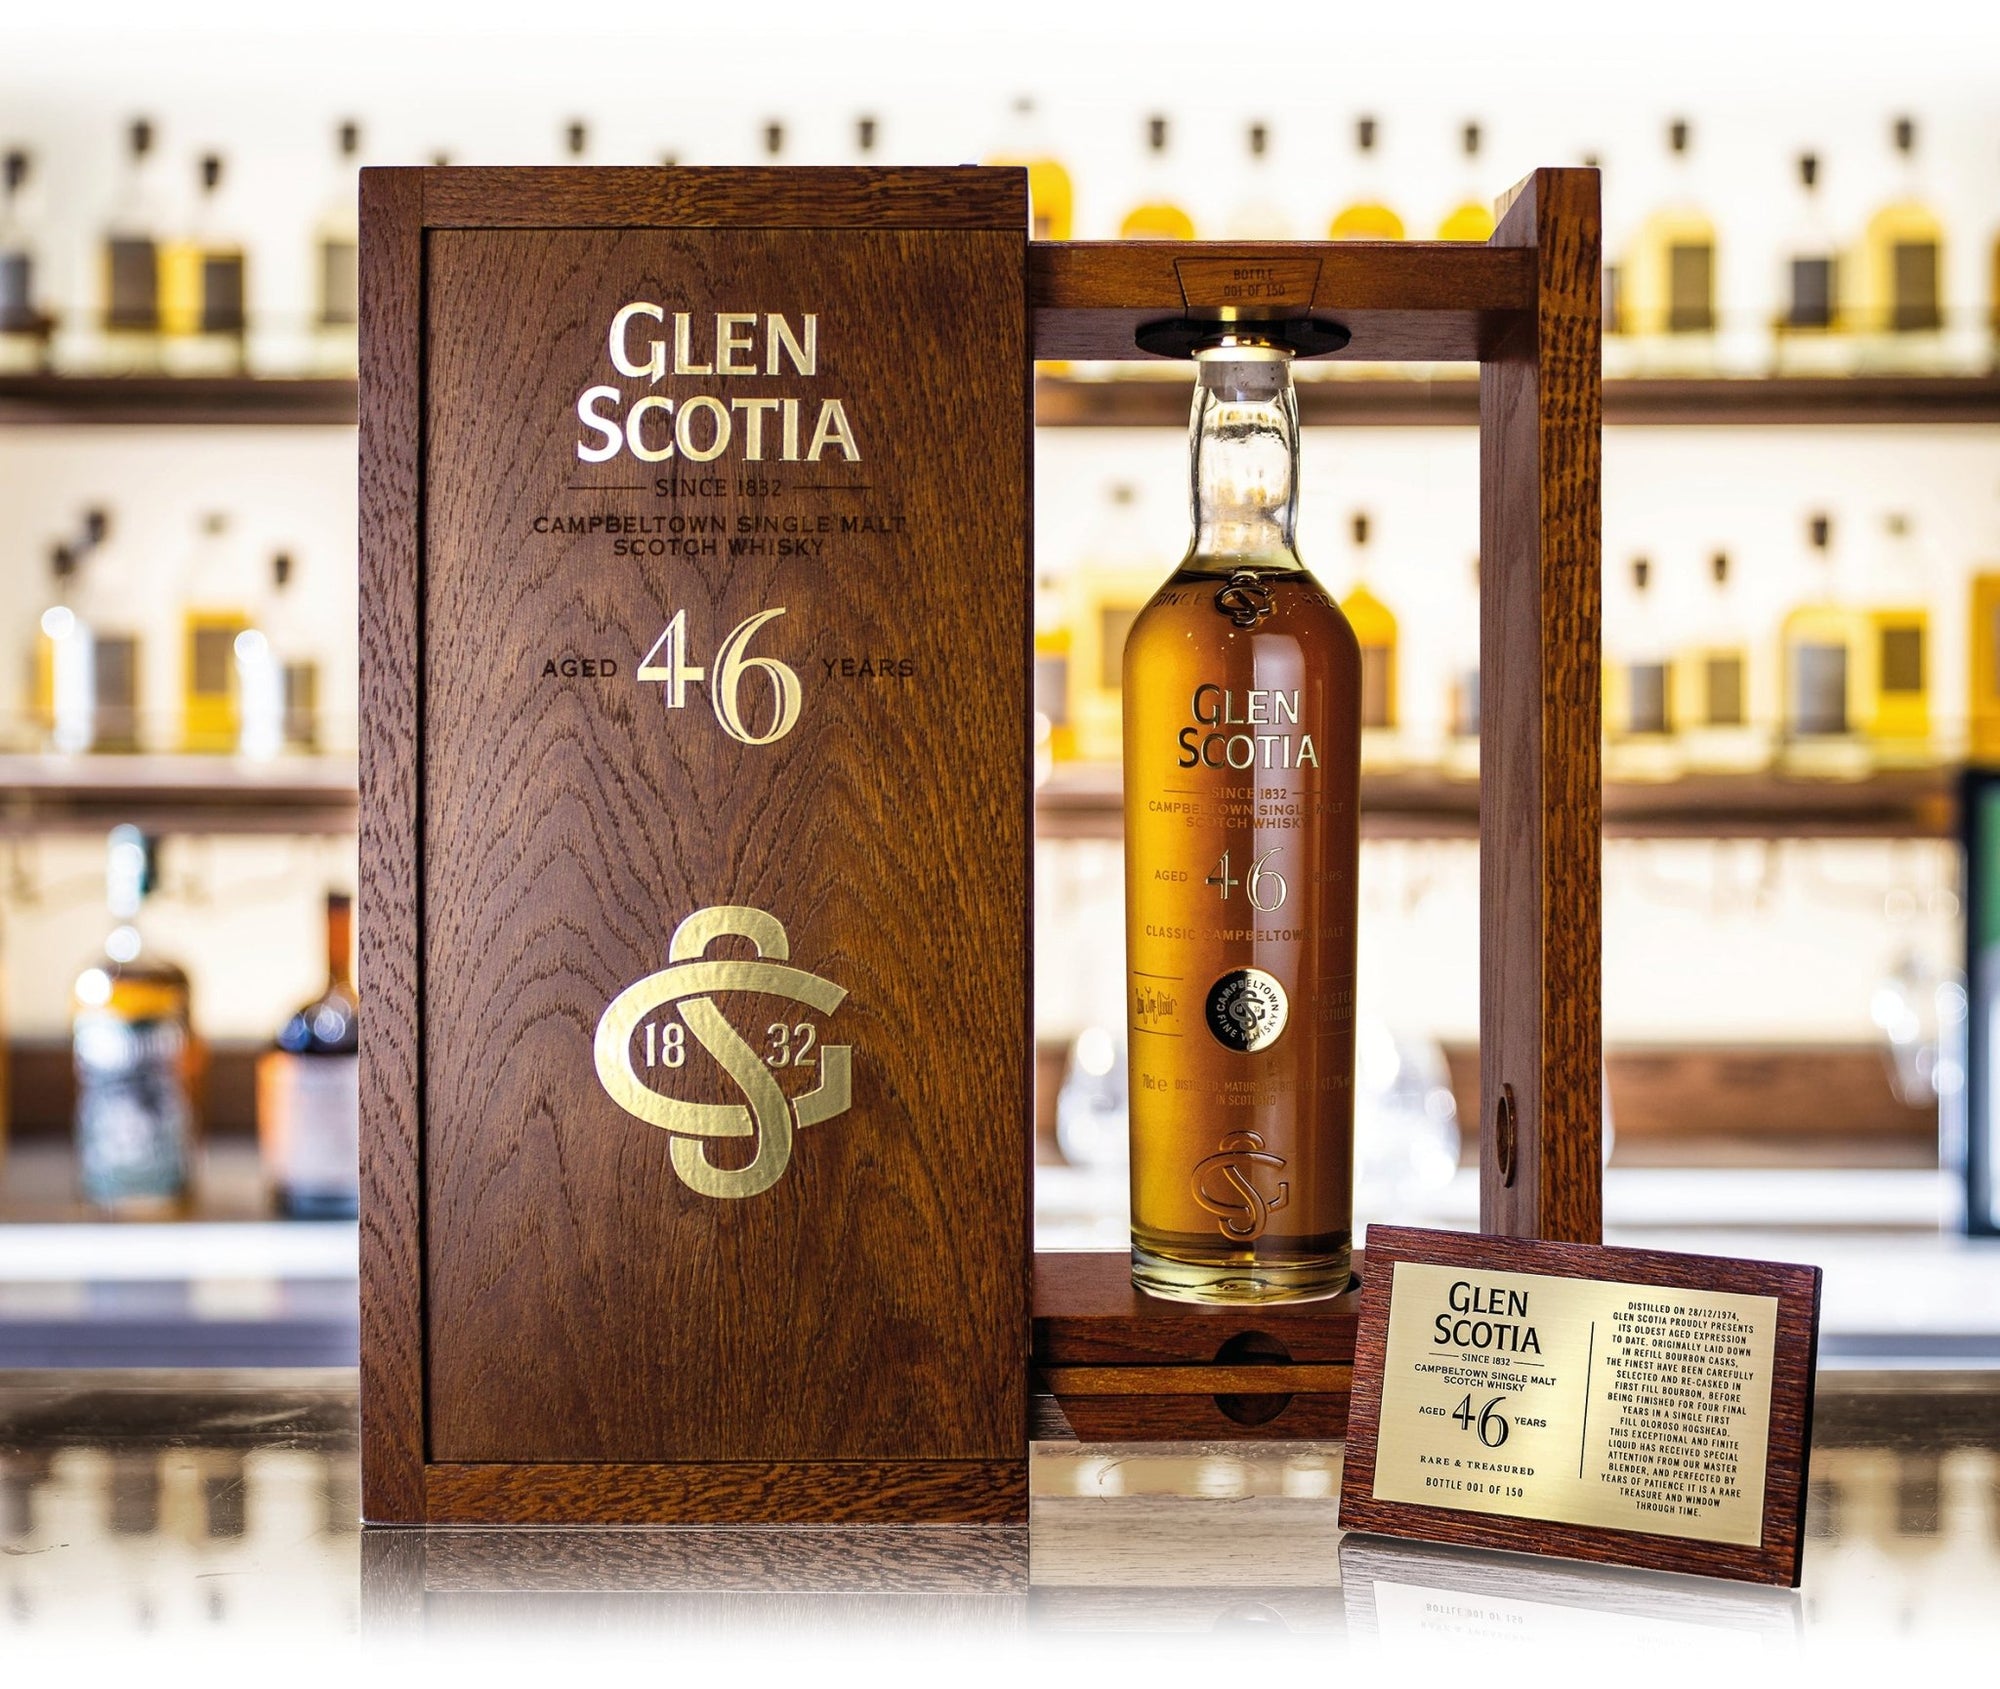 Glen Scotia Unveils 46 Year Old Whisky - Oldest & Rarest Expression To Date - Loch Lomond Group